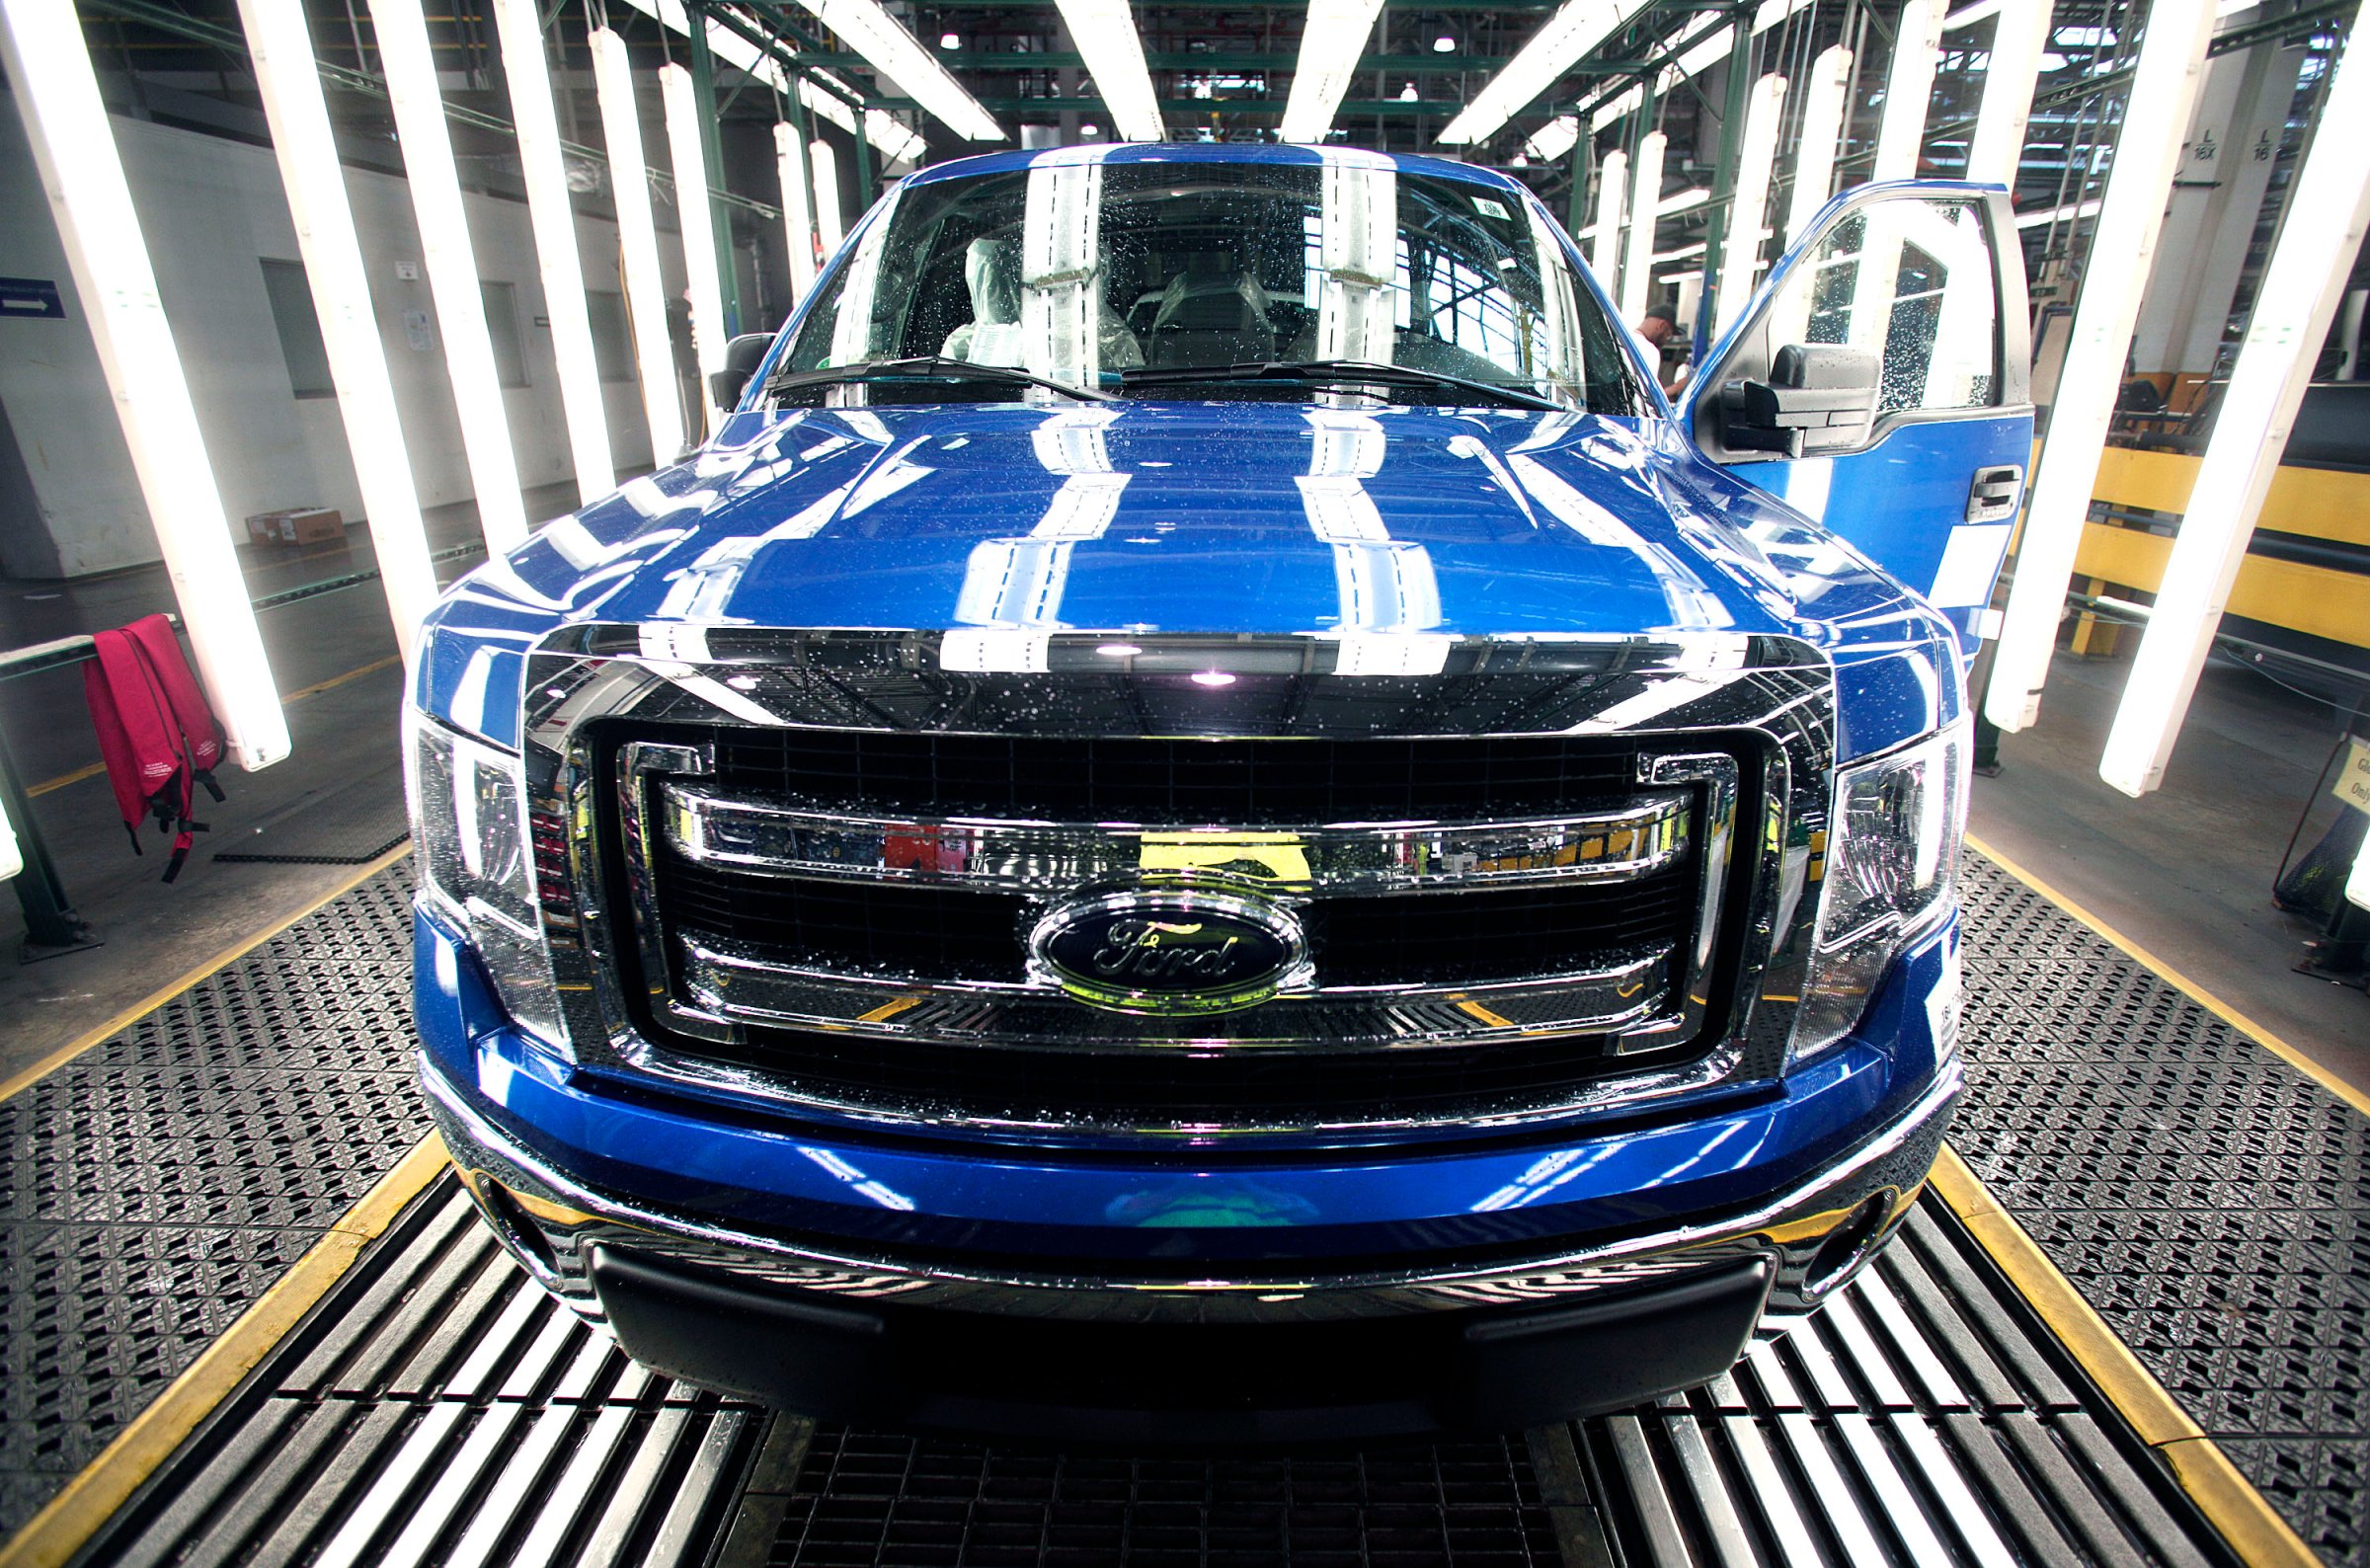 A new 2014 Ford F-150 truck exits a quality control inspection after undergoing assembly at the Ford Dearborn Truck Plant on June 13, 2014 in Dearborn, Mich.